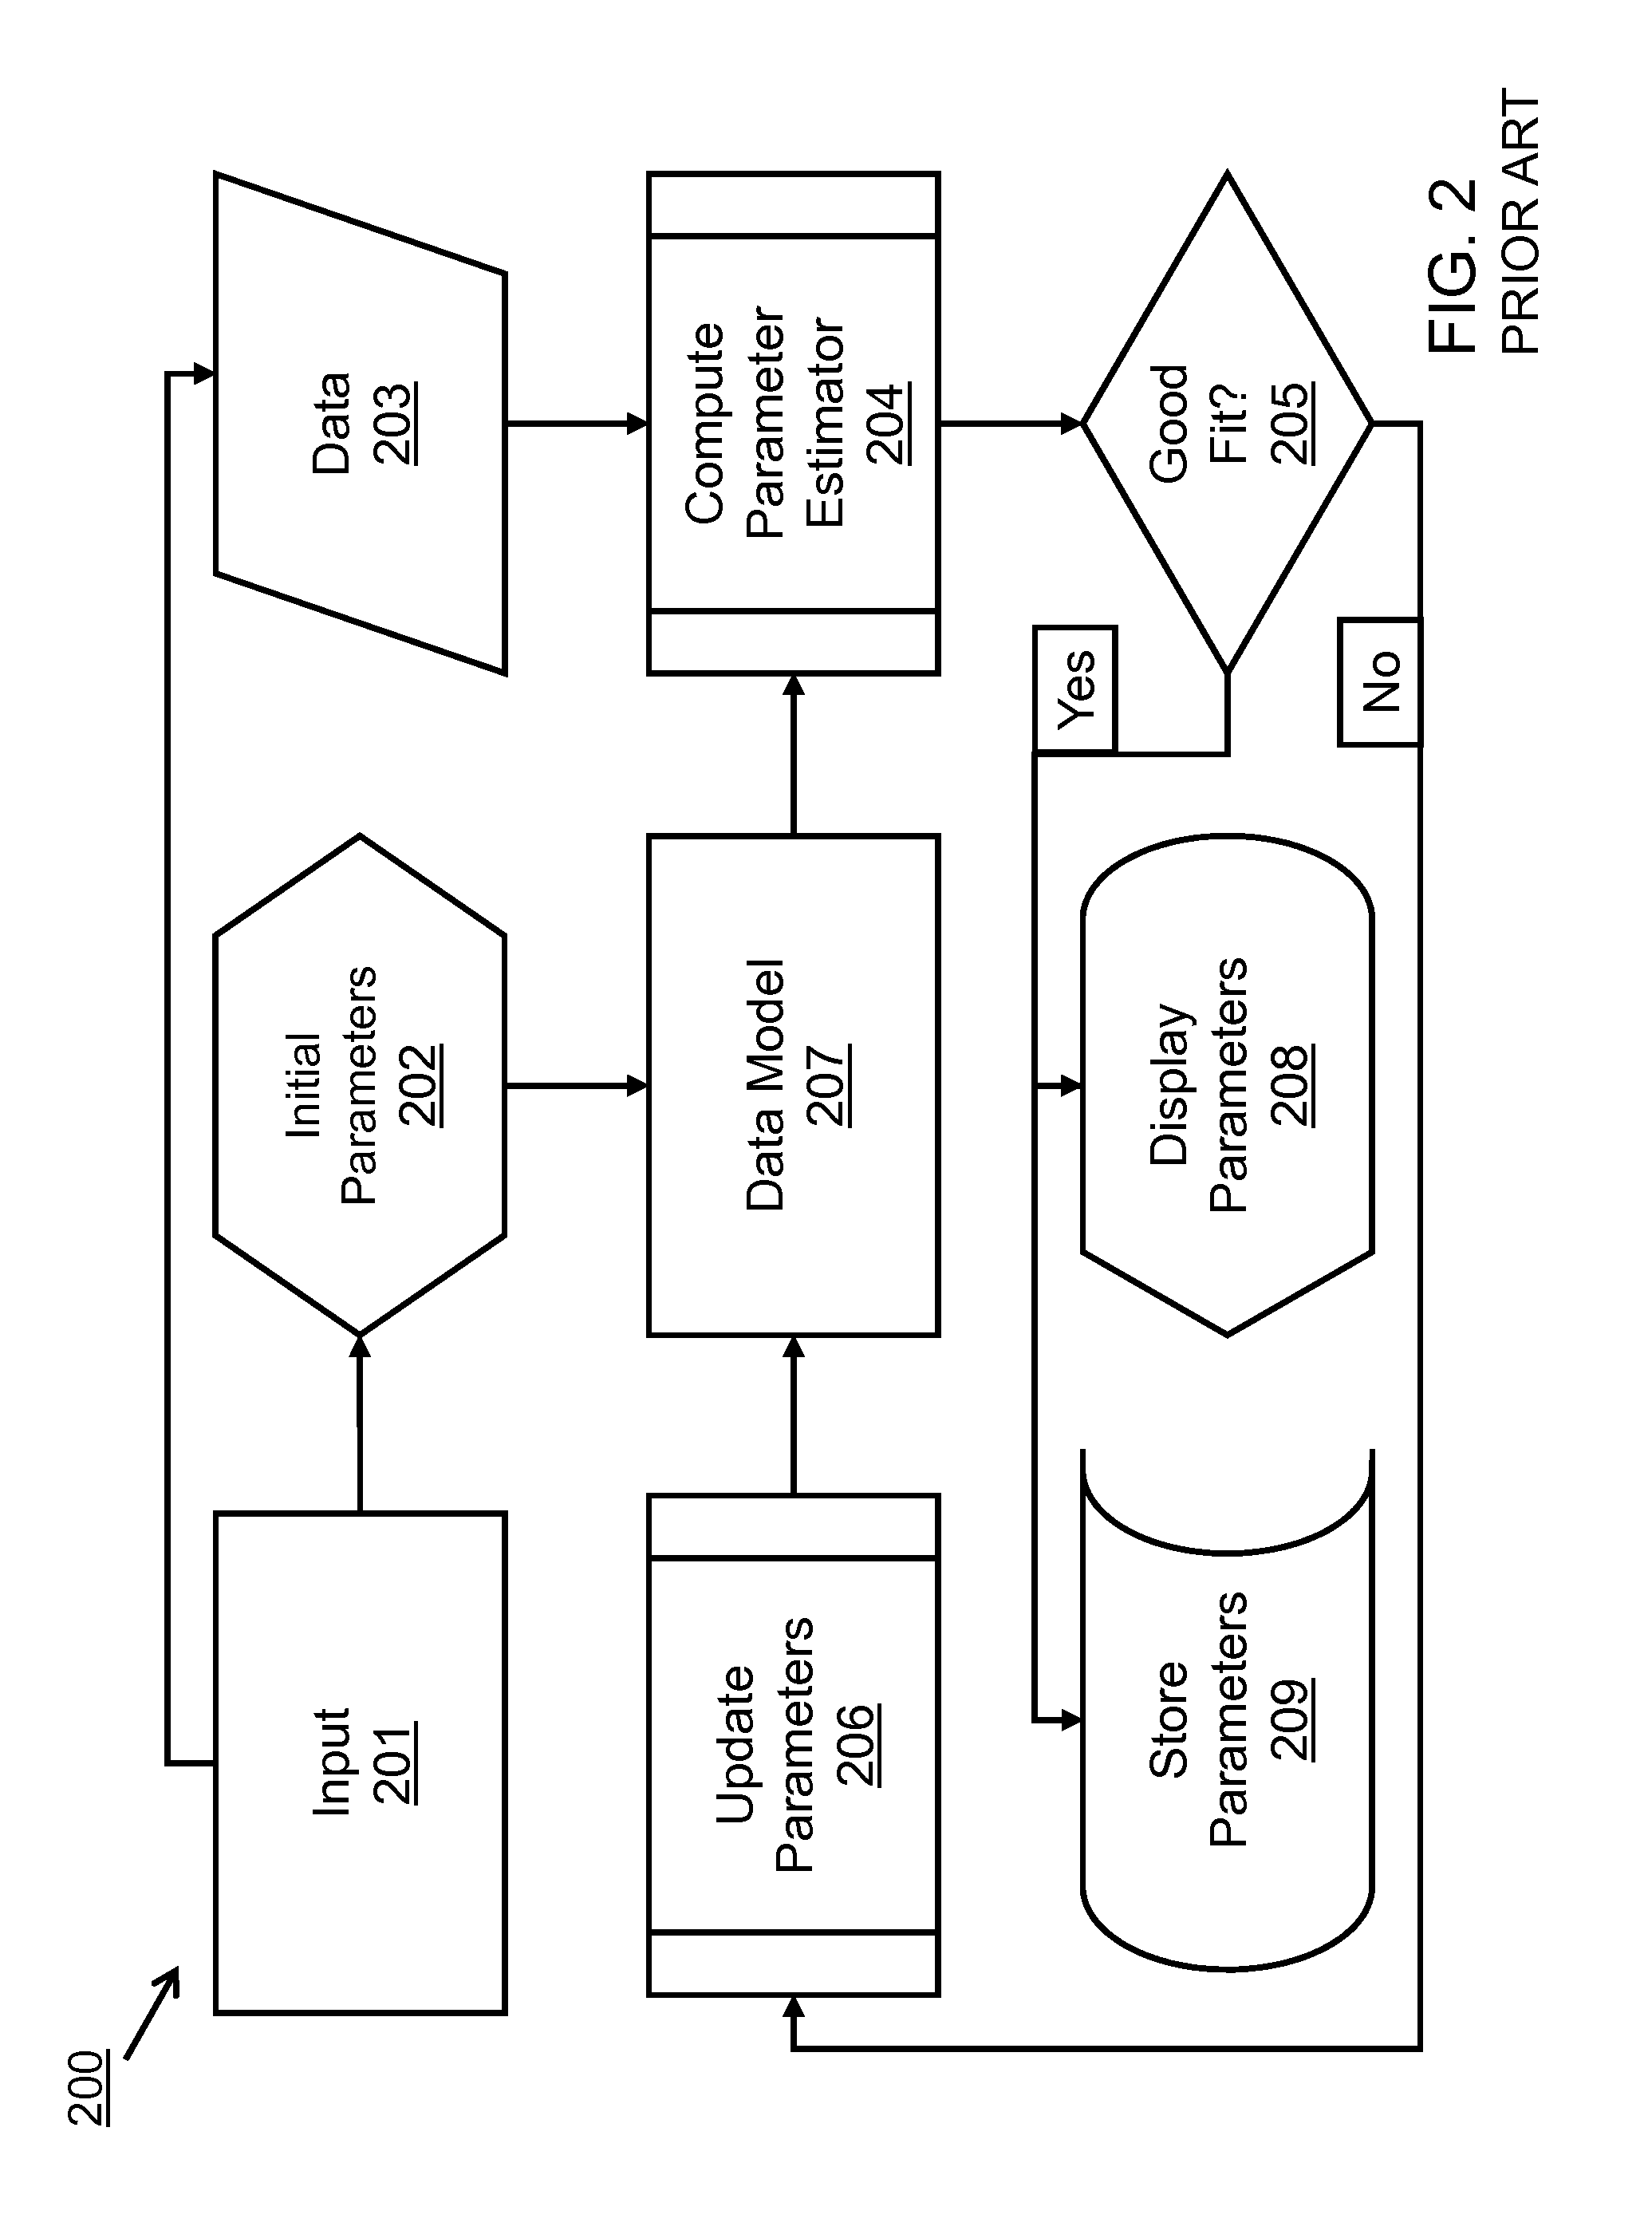 Method and system for statistical modeling of data using a quadratic likelihood functional